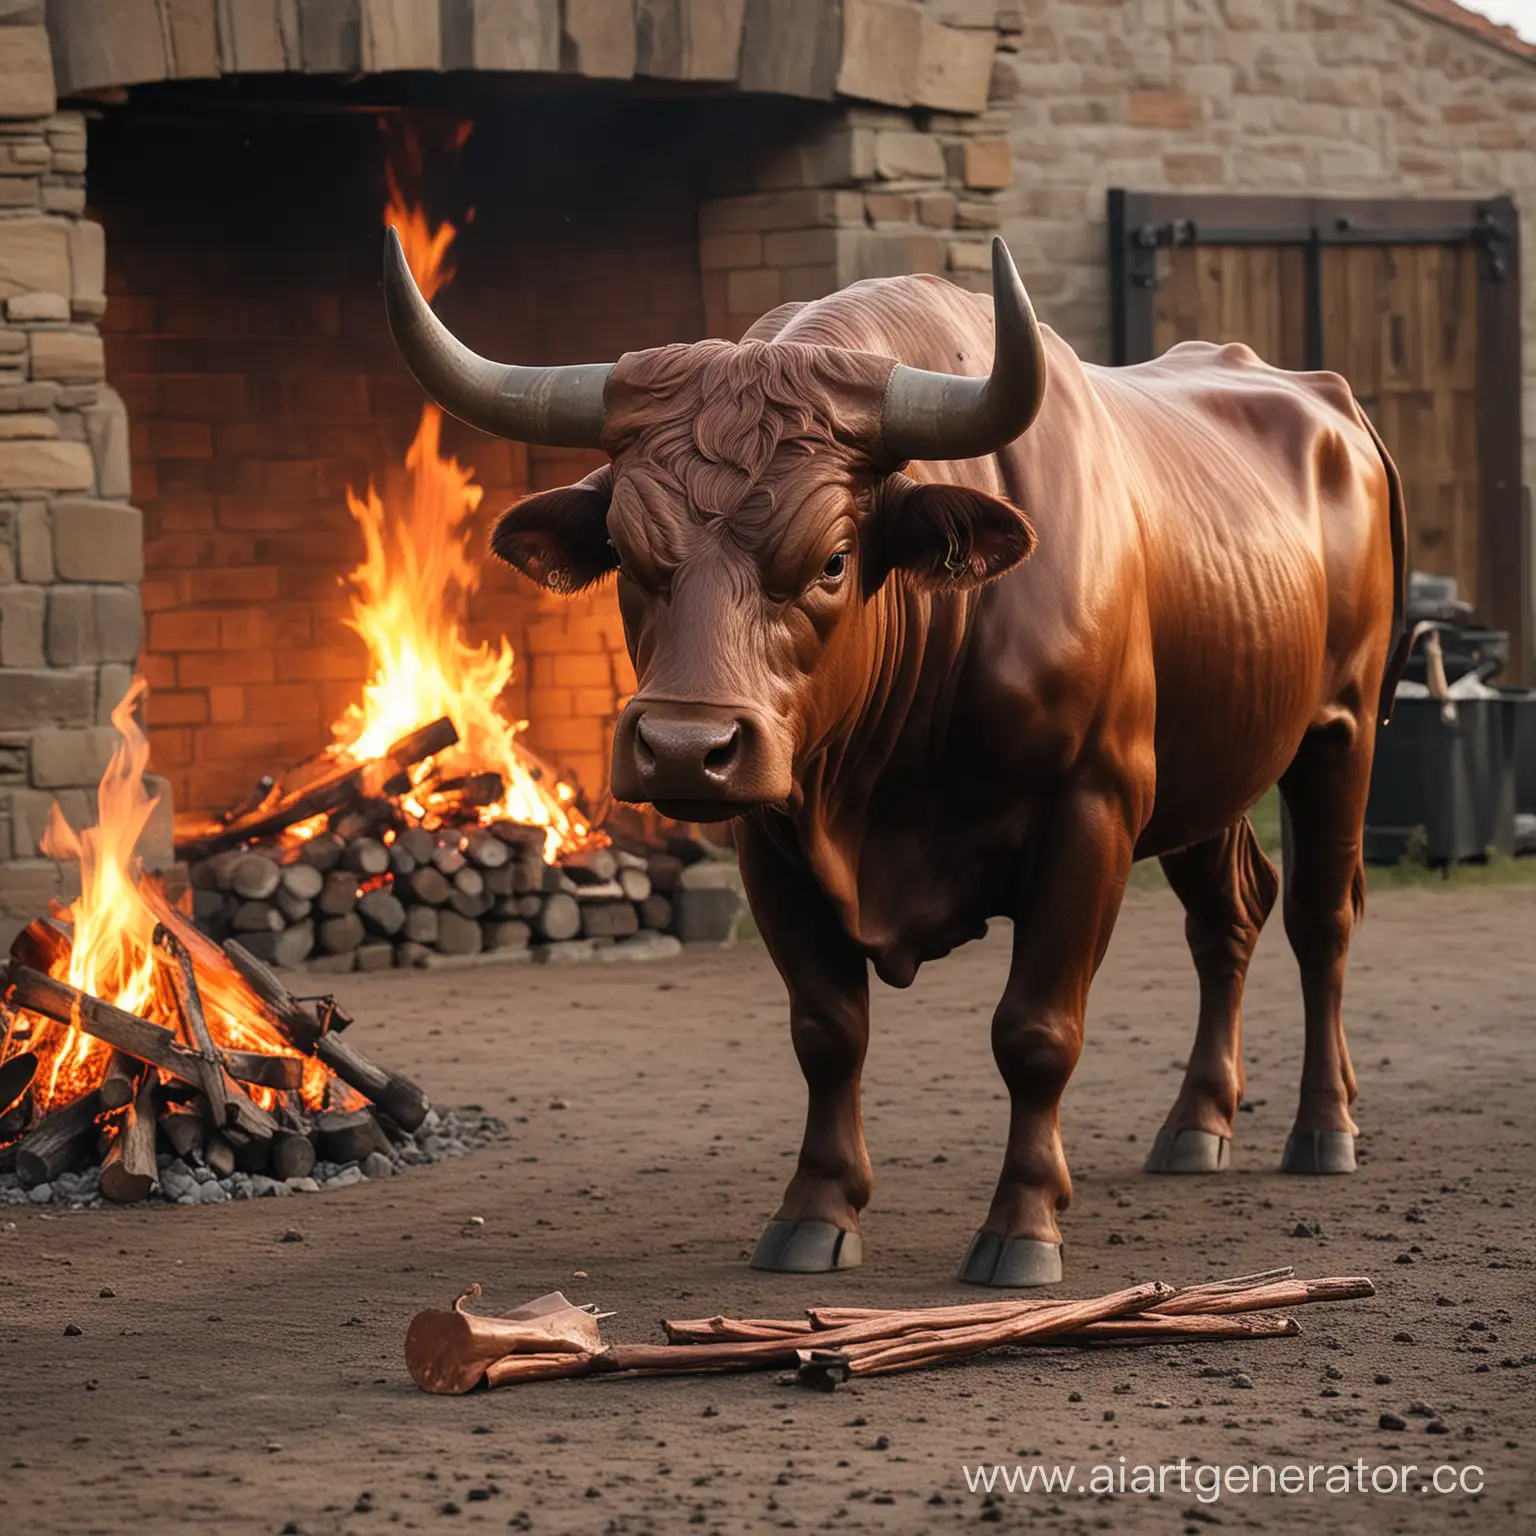 Copper-Bull-Sculpture-by-the-Fireside